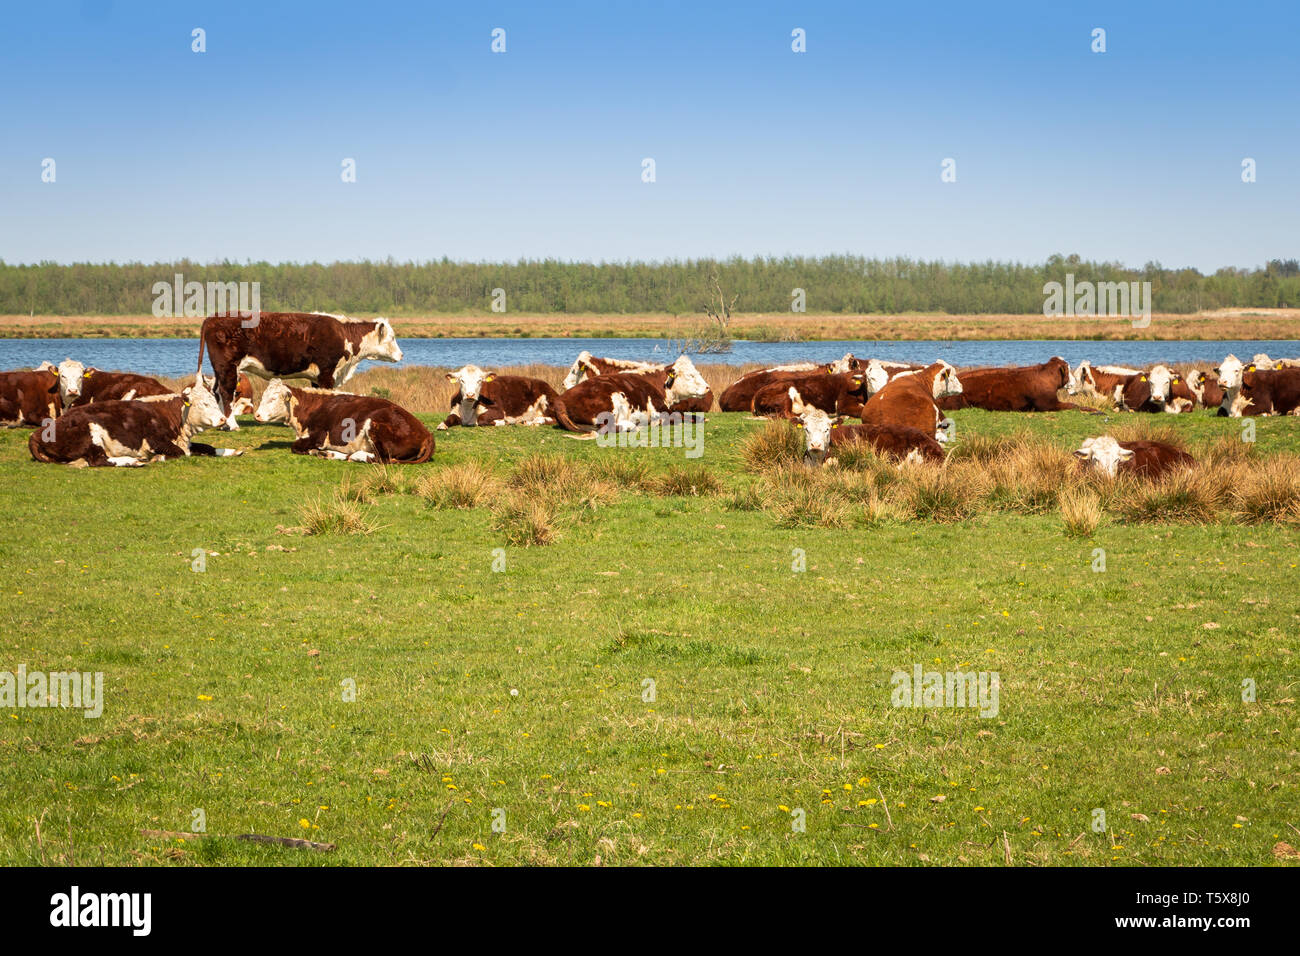 Red colored Holstein Frisian cows in the nature reserve Fochteloerveen Stock Photo